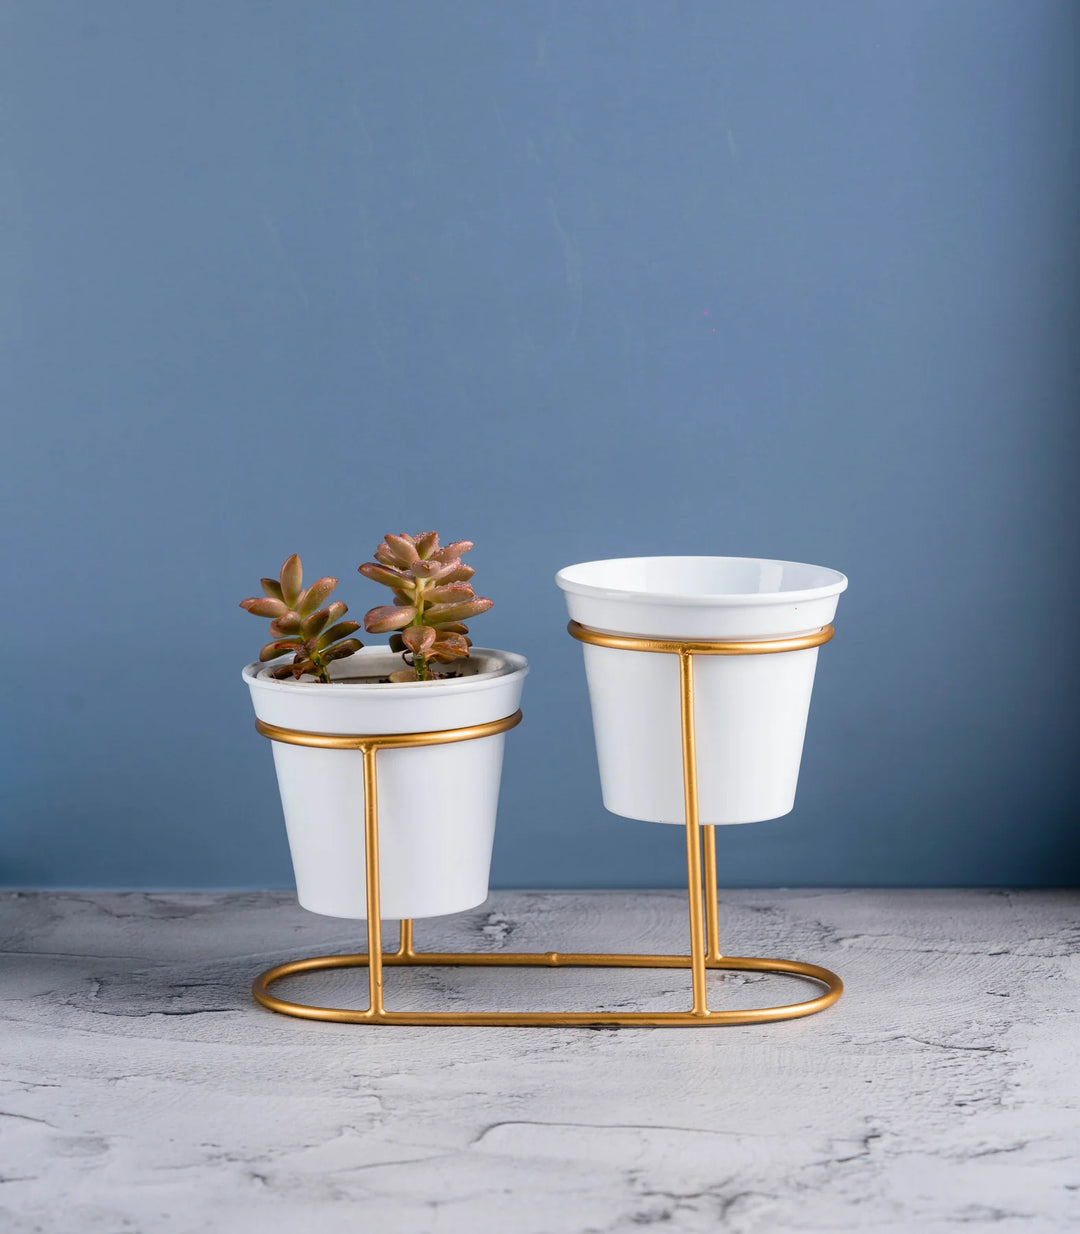 Set of 5 Metal Planters with Stands | Metallic Gold Ottoman Metal Stands With Planters Set of 5